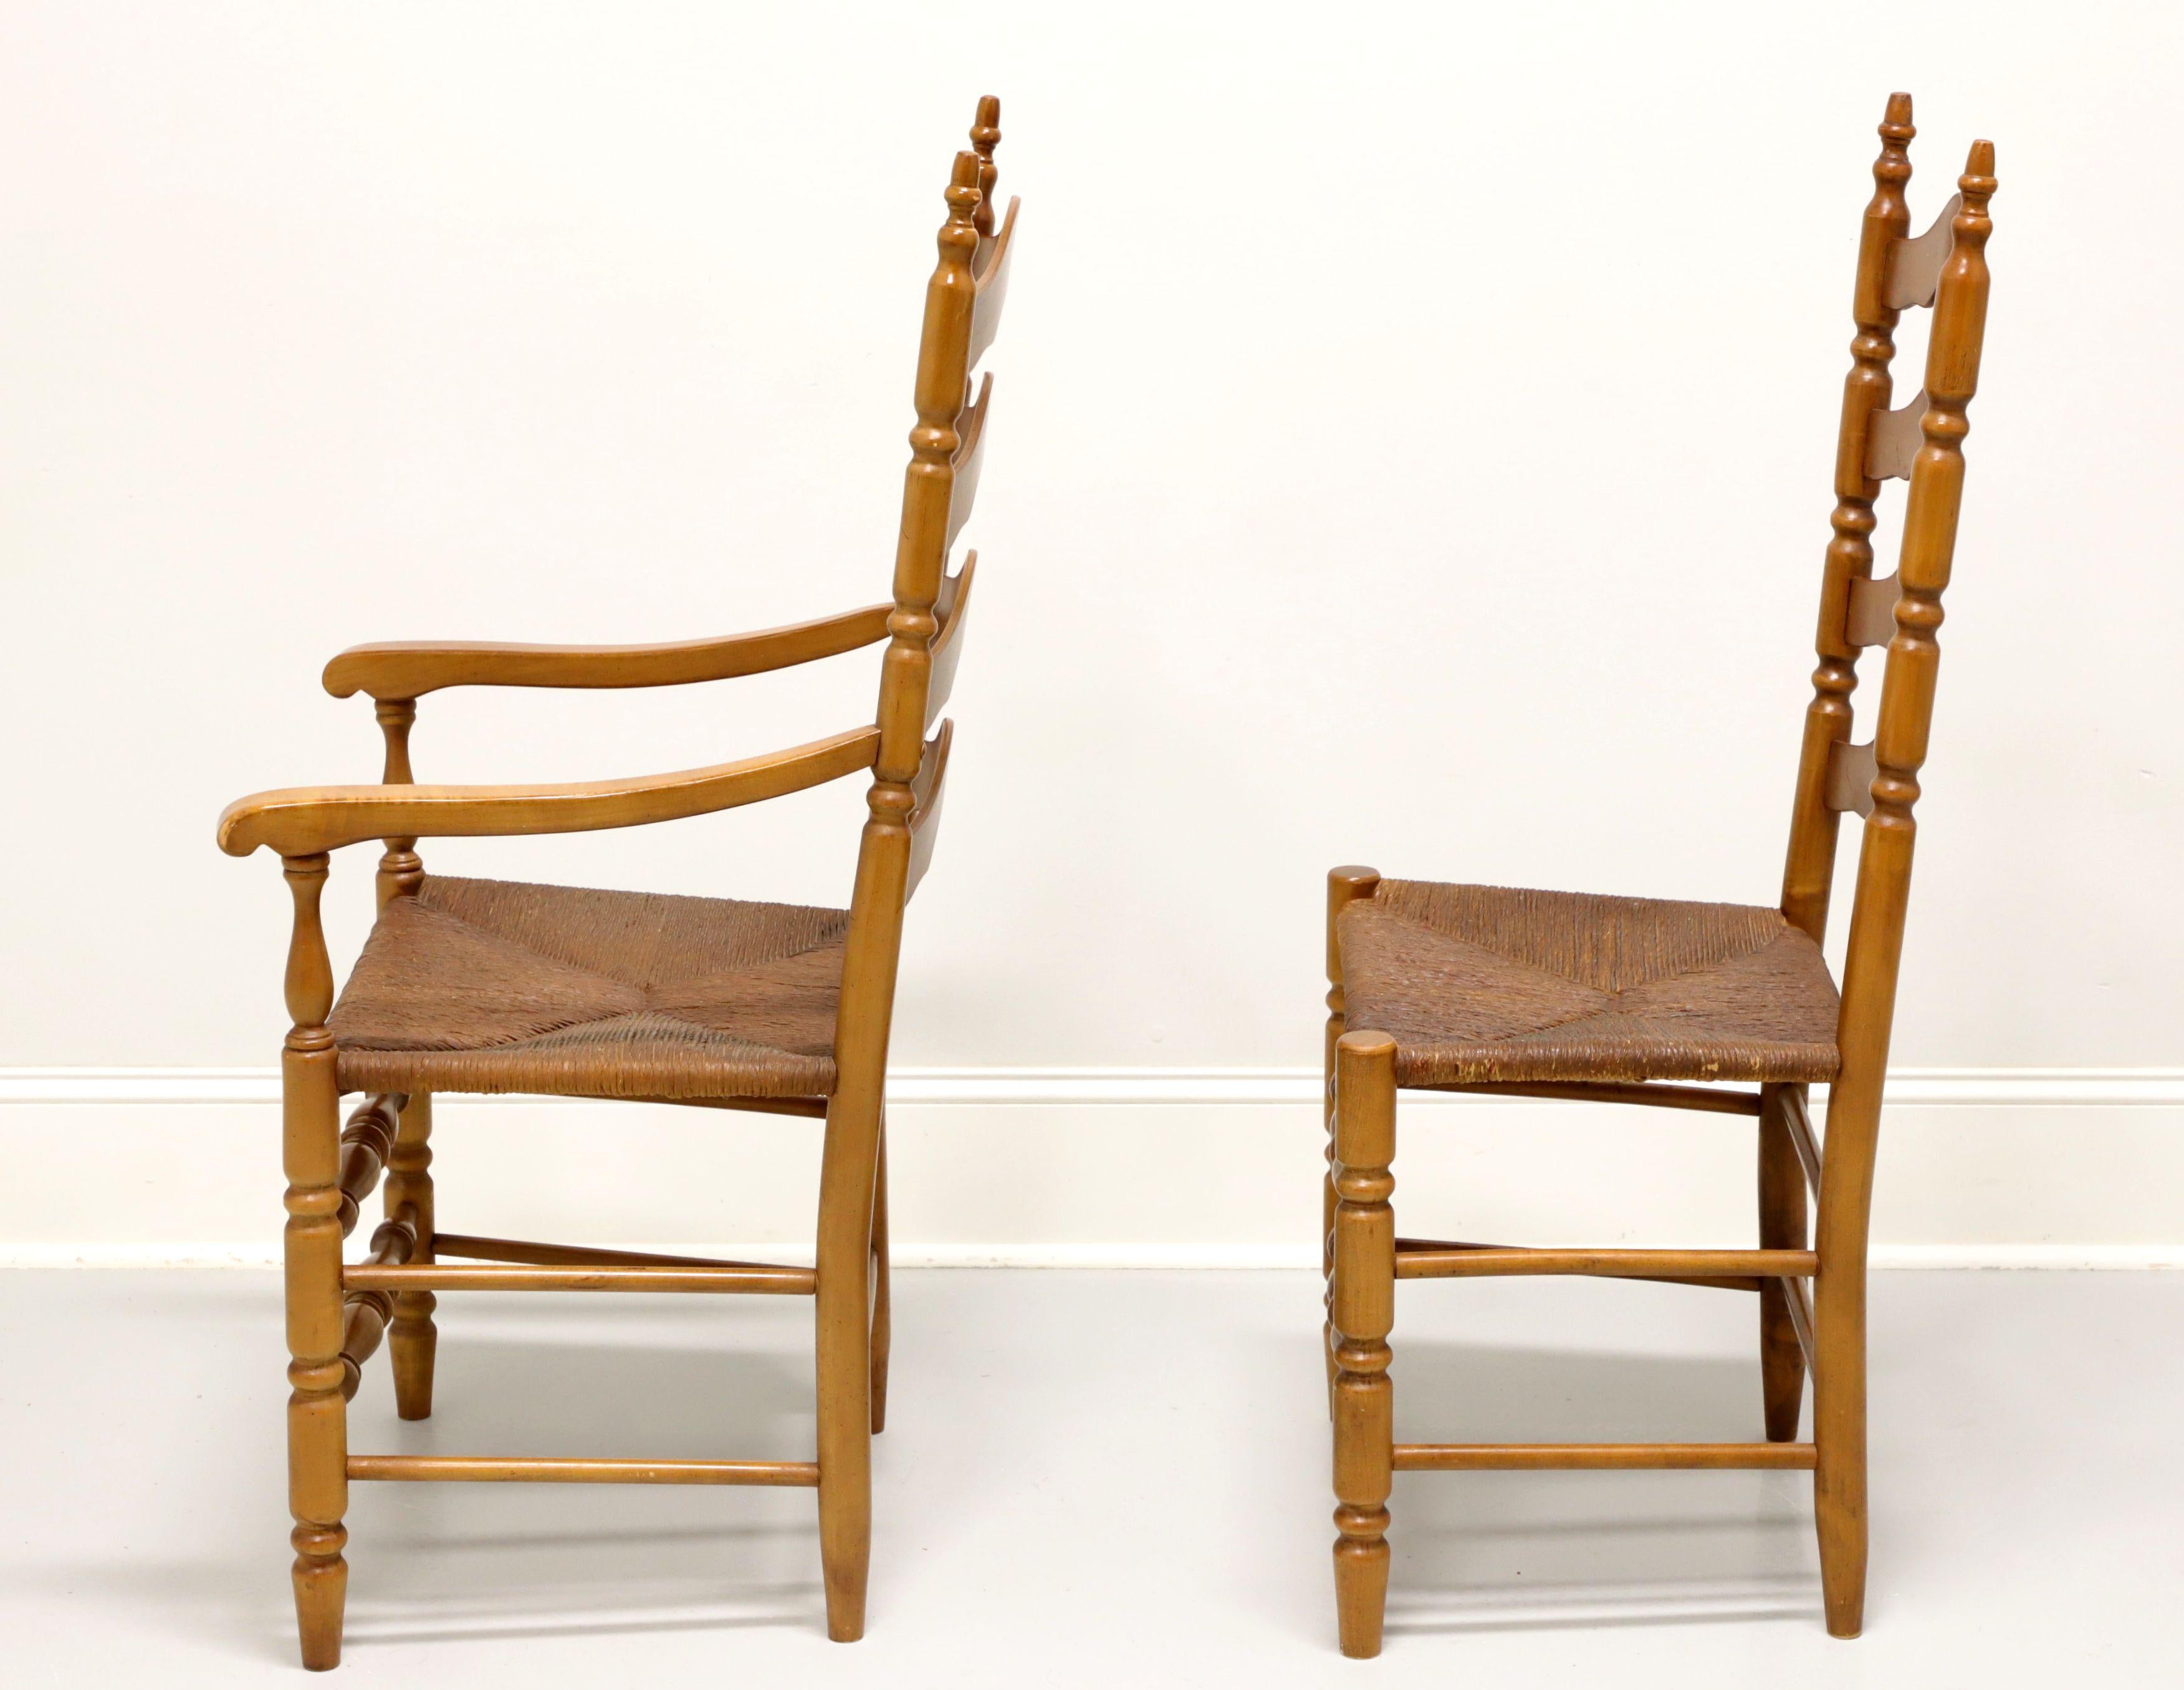 Rustic Mid 20th Century Maple Farmhouse Ladder Back Armchair and Side Chair - Pair For Sale